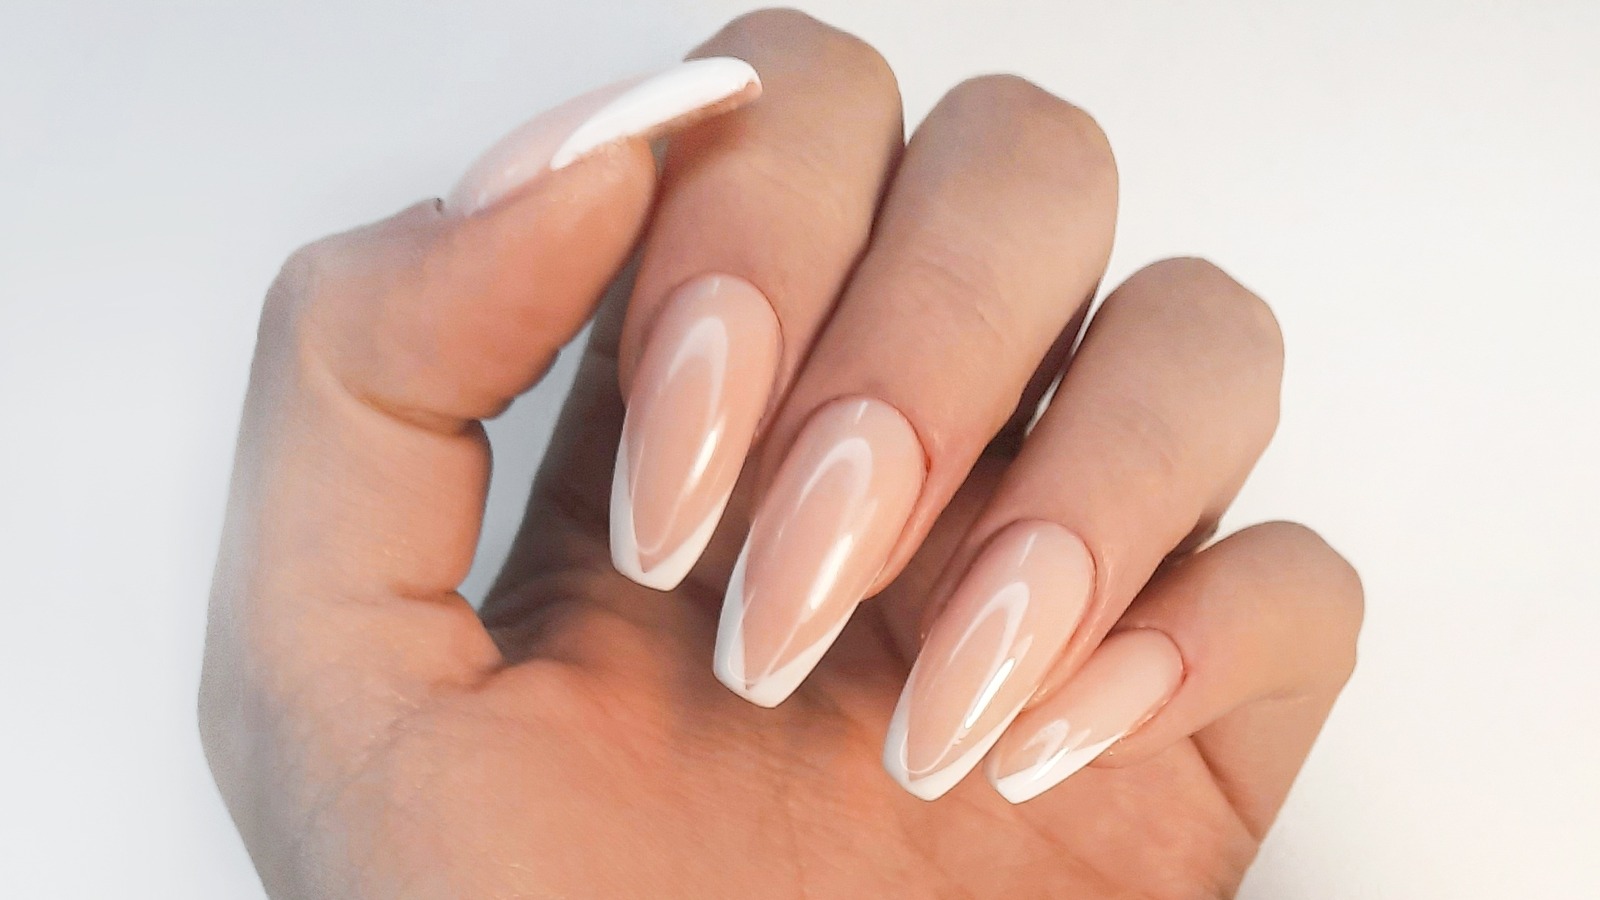 Follow The 90-10 Rule To Get Your Desired Nail Length And Shape Every Time